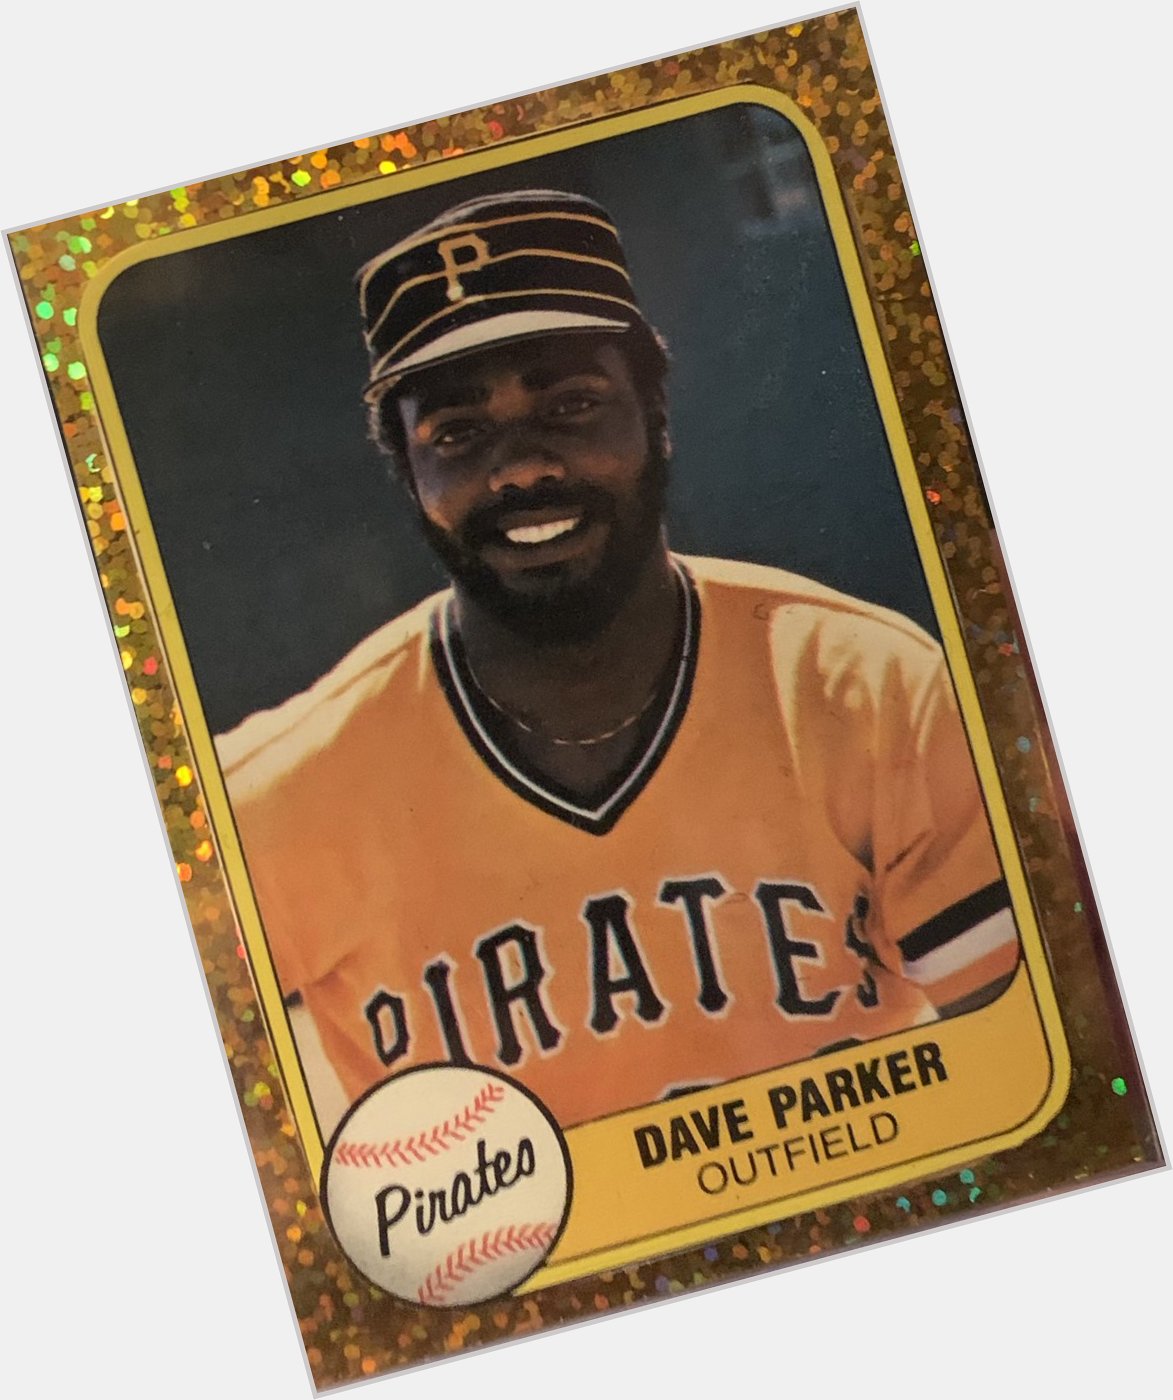 Happy birthday to Dave Parker!

Perfect time to show off my Studios creations... 